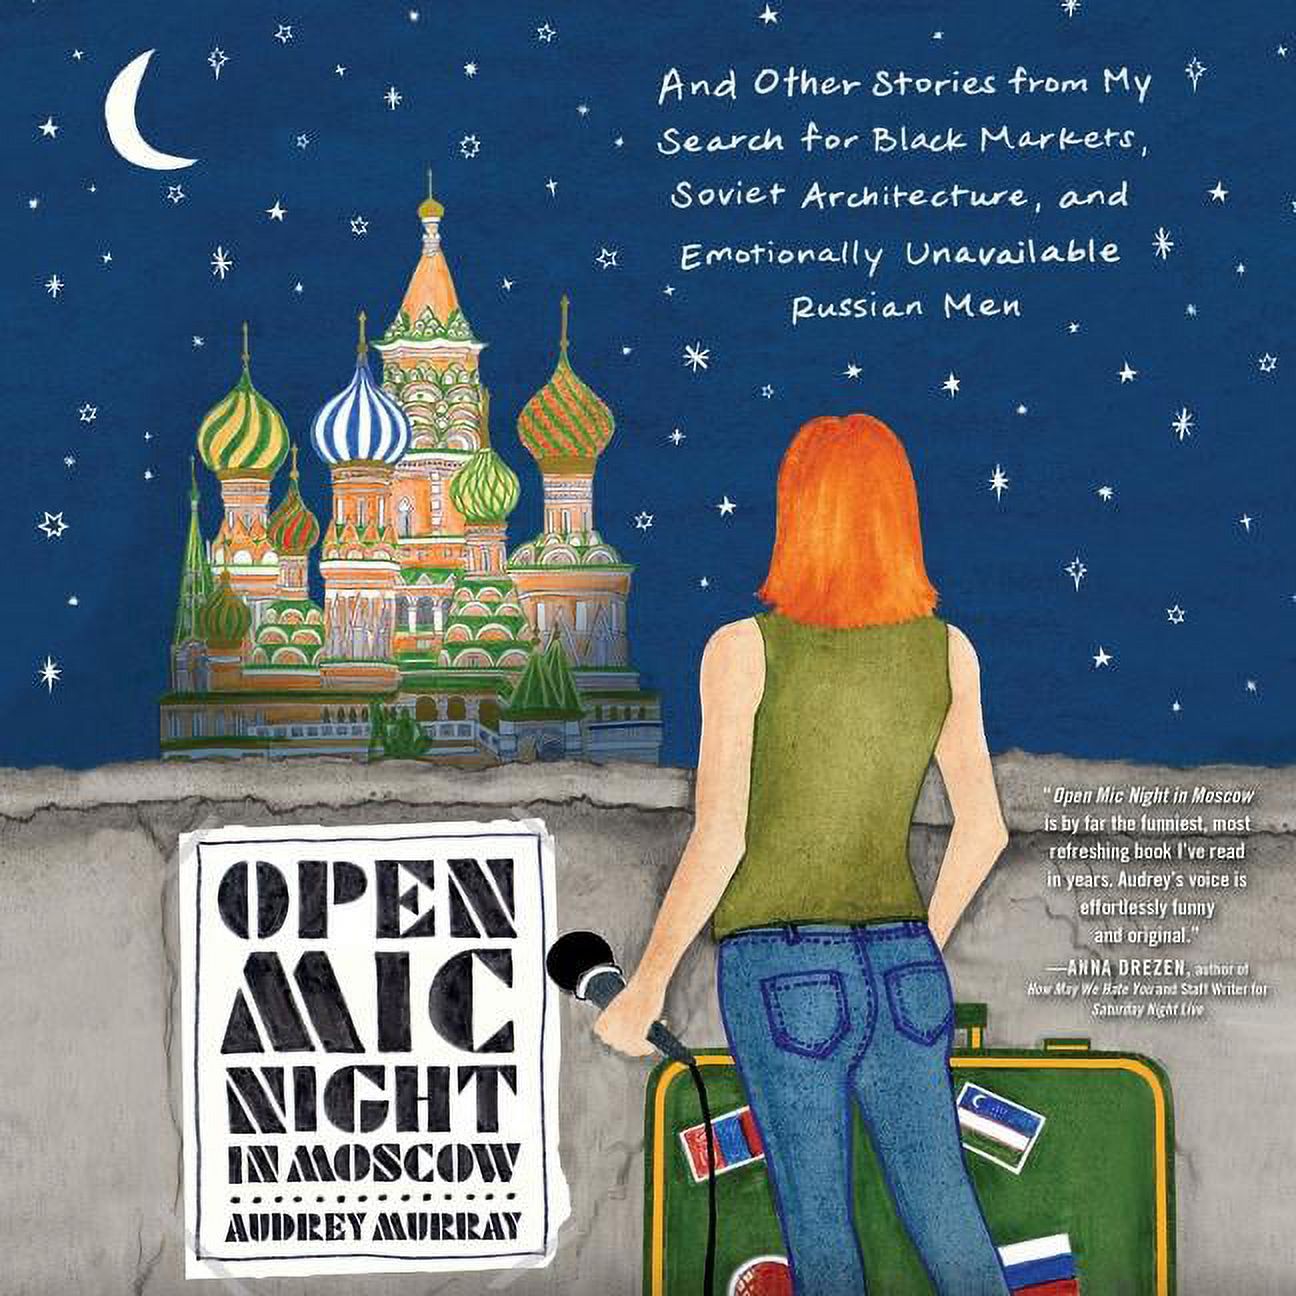 Open MIC Night in Moscow: And Other Stories from My Search for Black Markets, Soviet Architecture, and Emotionally Unavailable Russian Men (Audiobook) - image 1 of 1